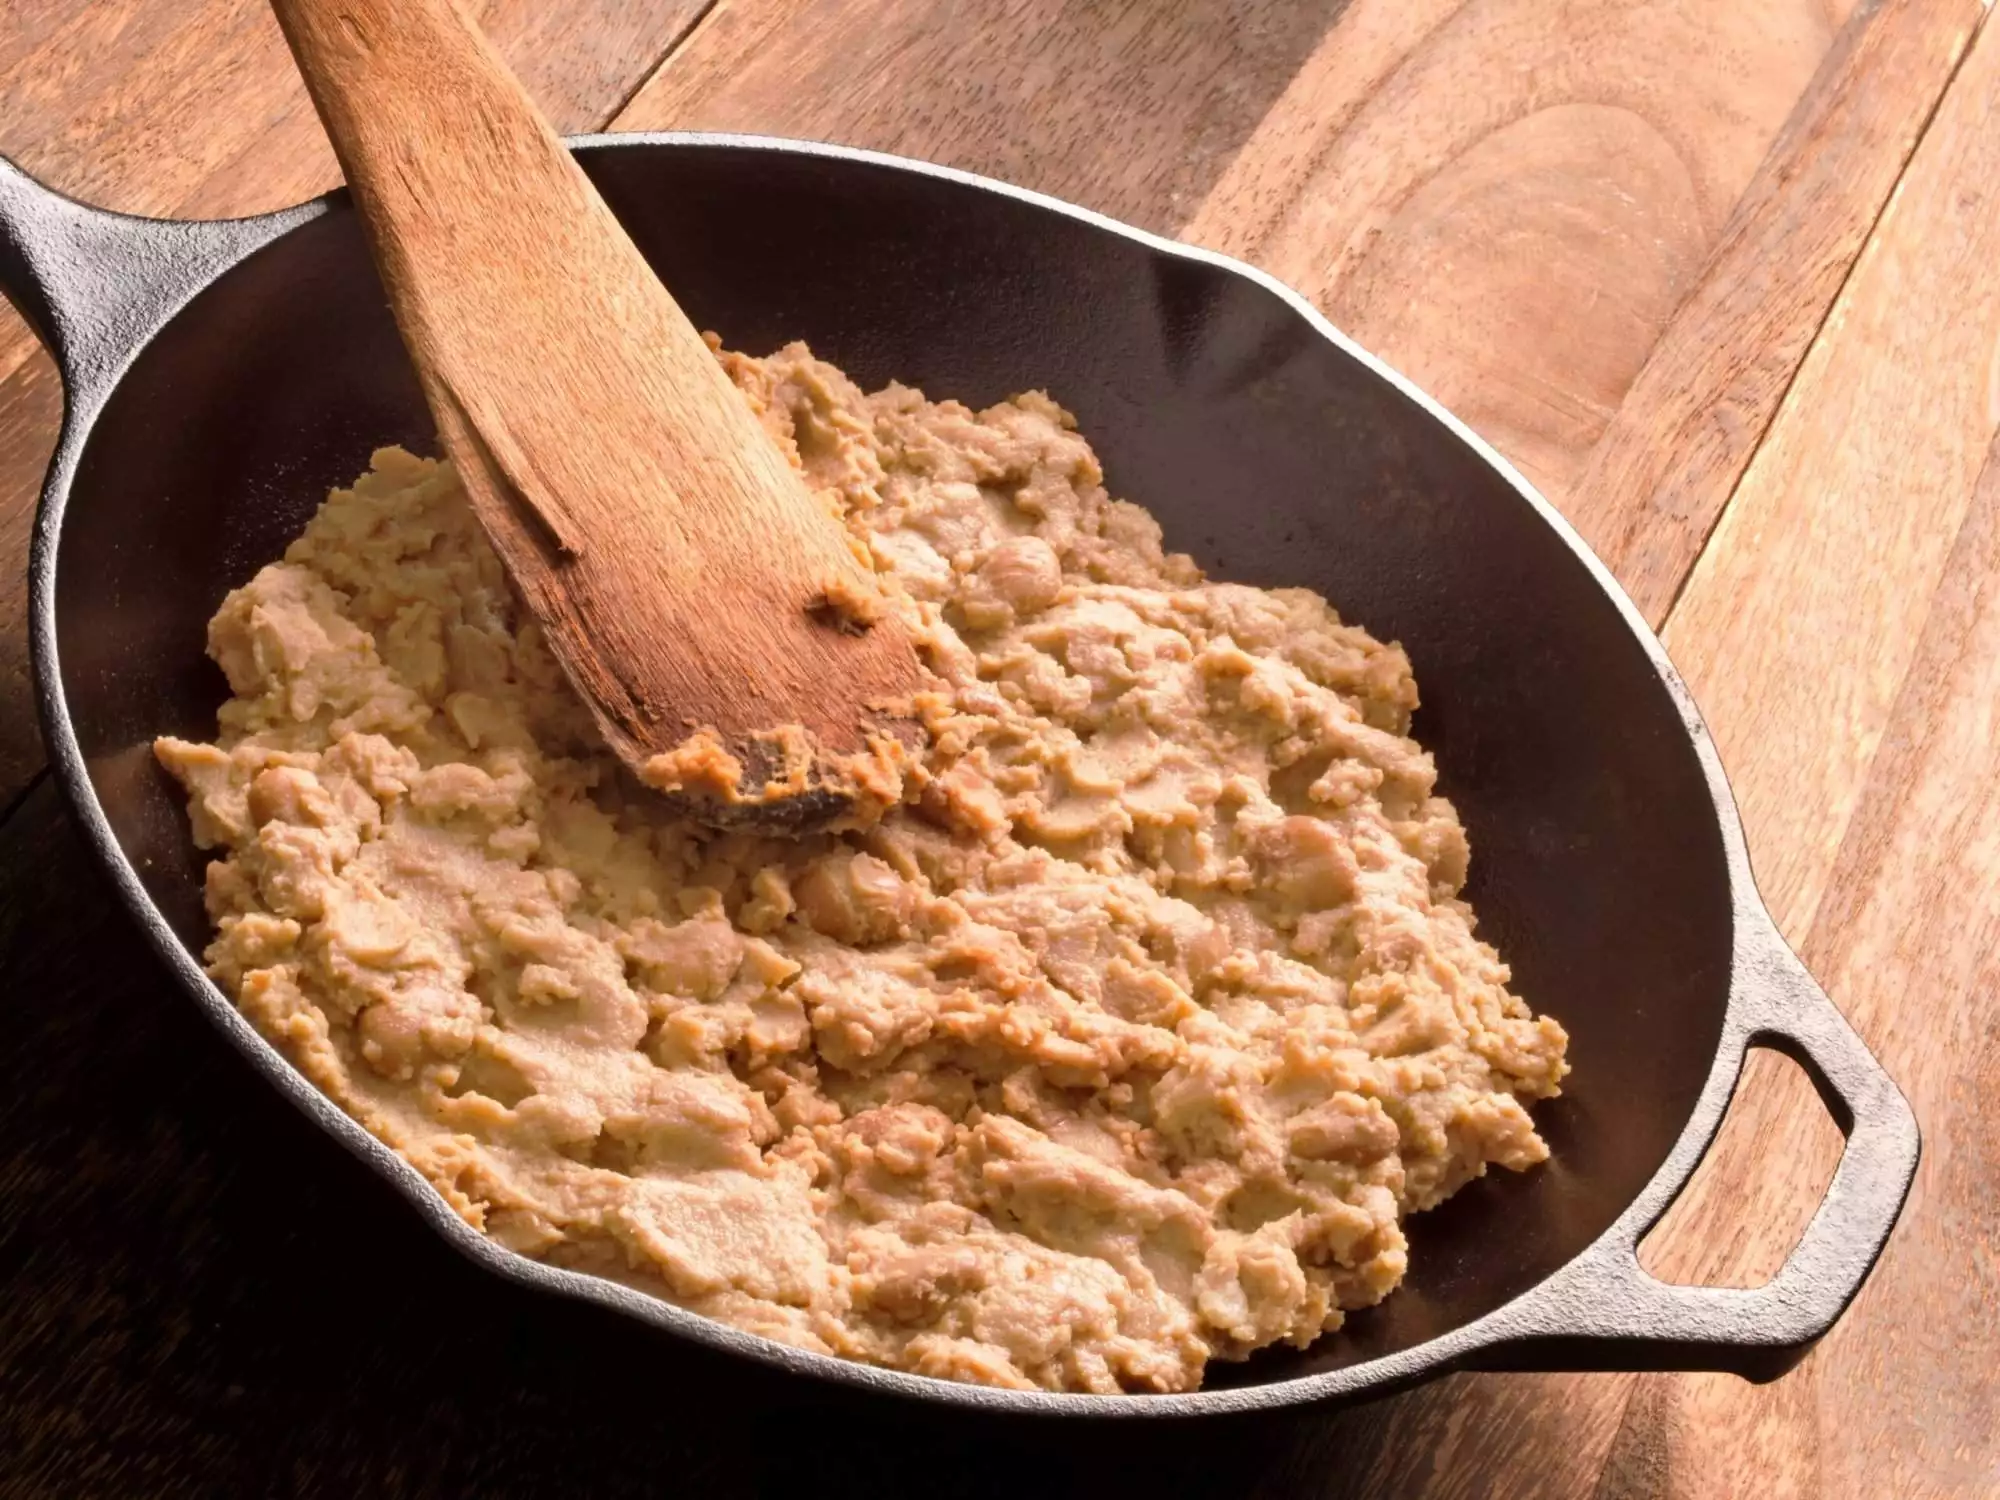 Are refried beans healthy?